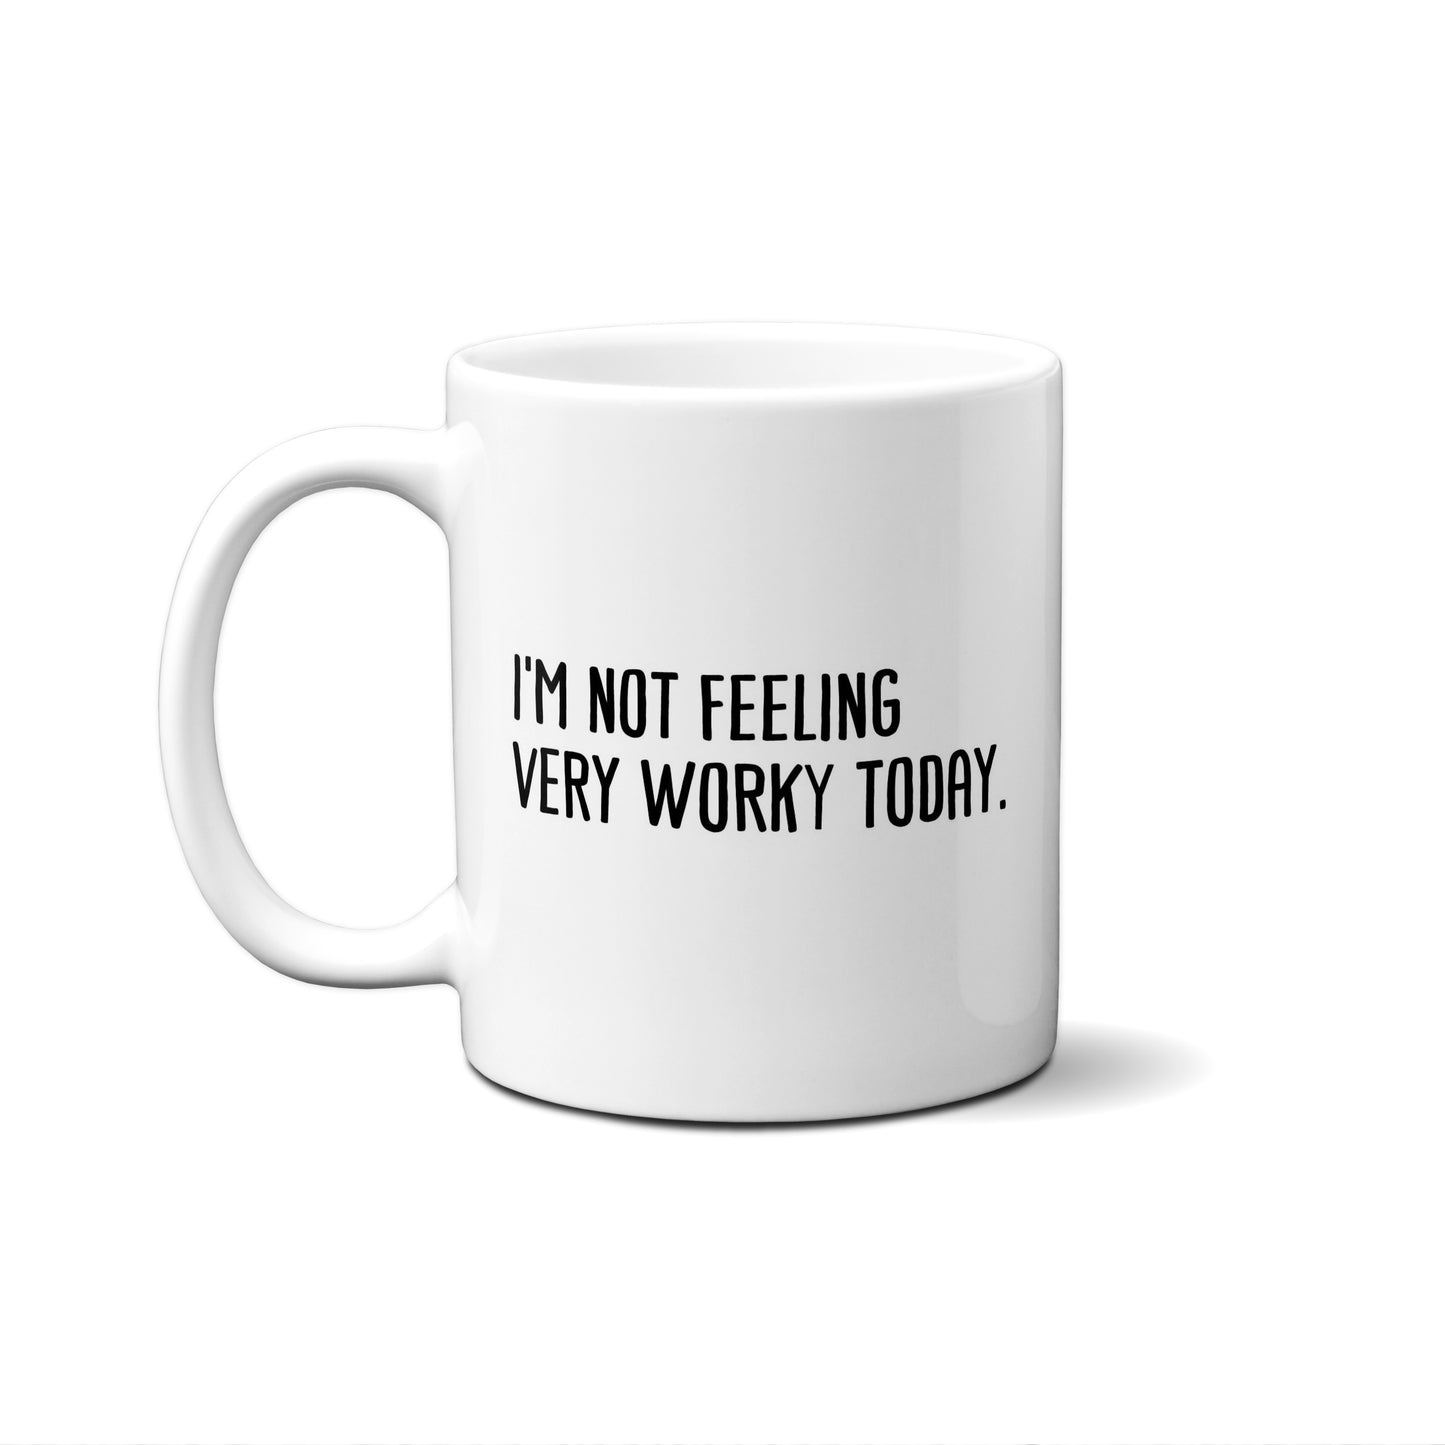 I'm Not Feeling Very Worky Today. Quote Mug